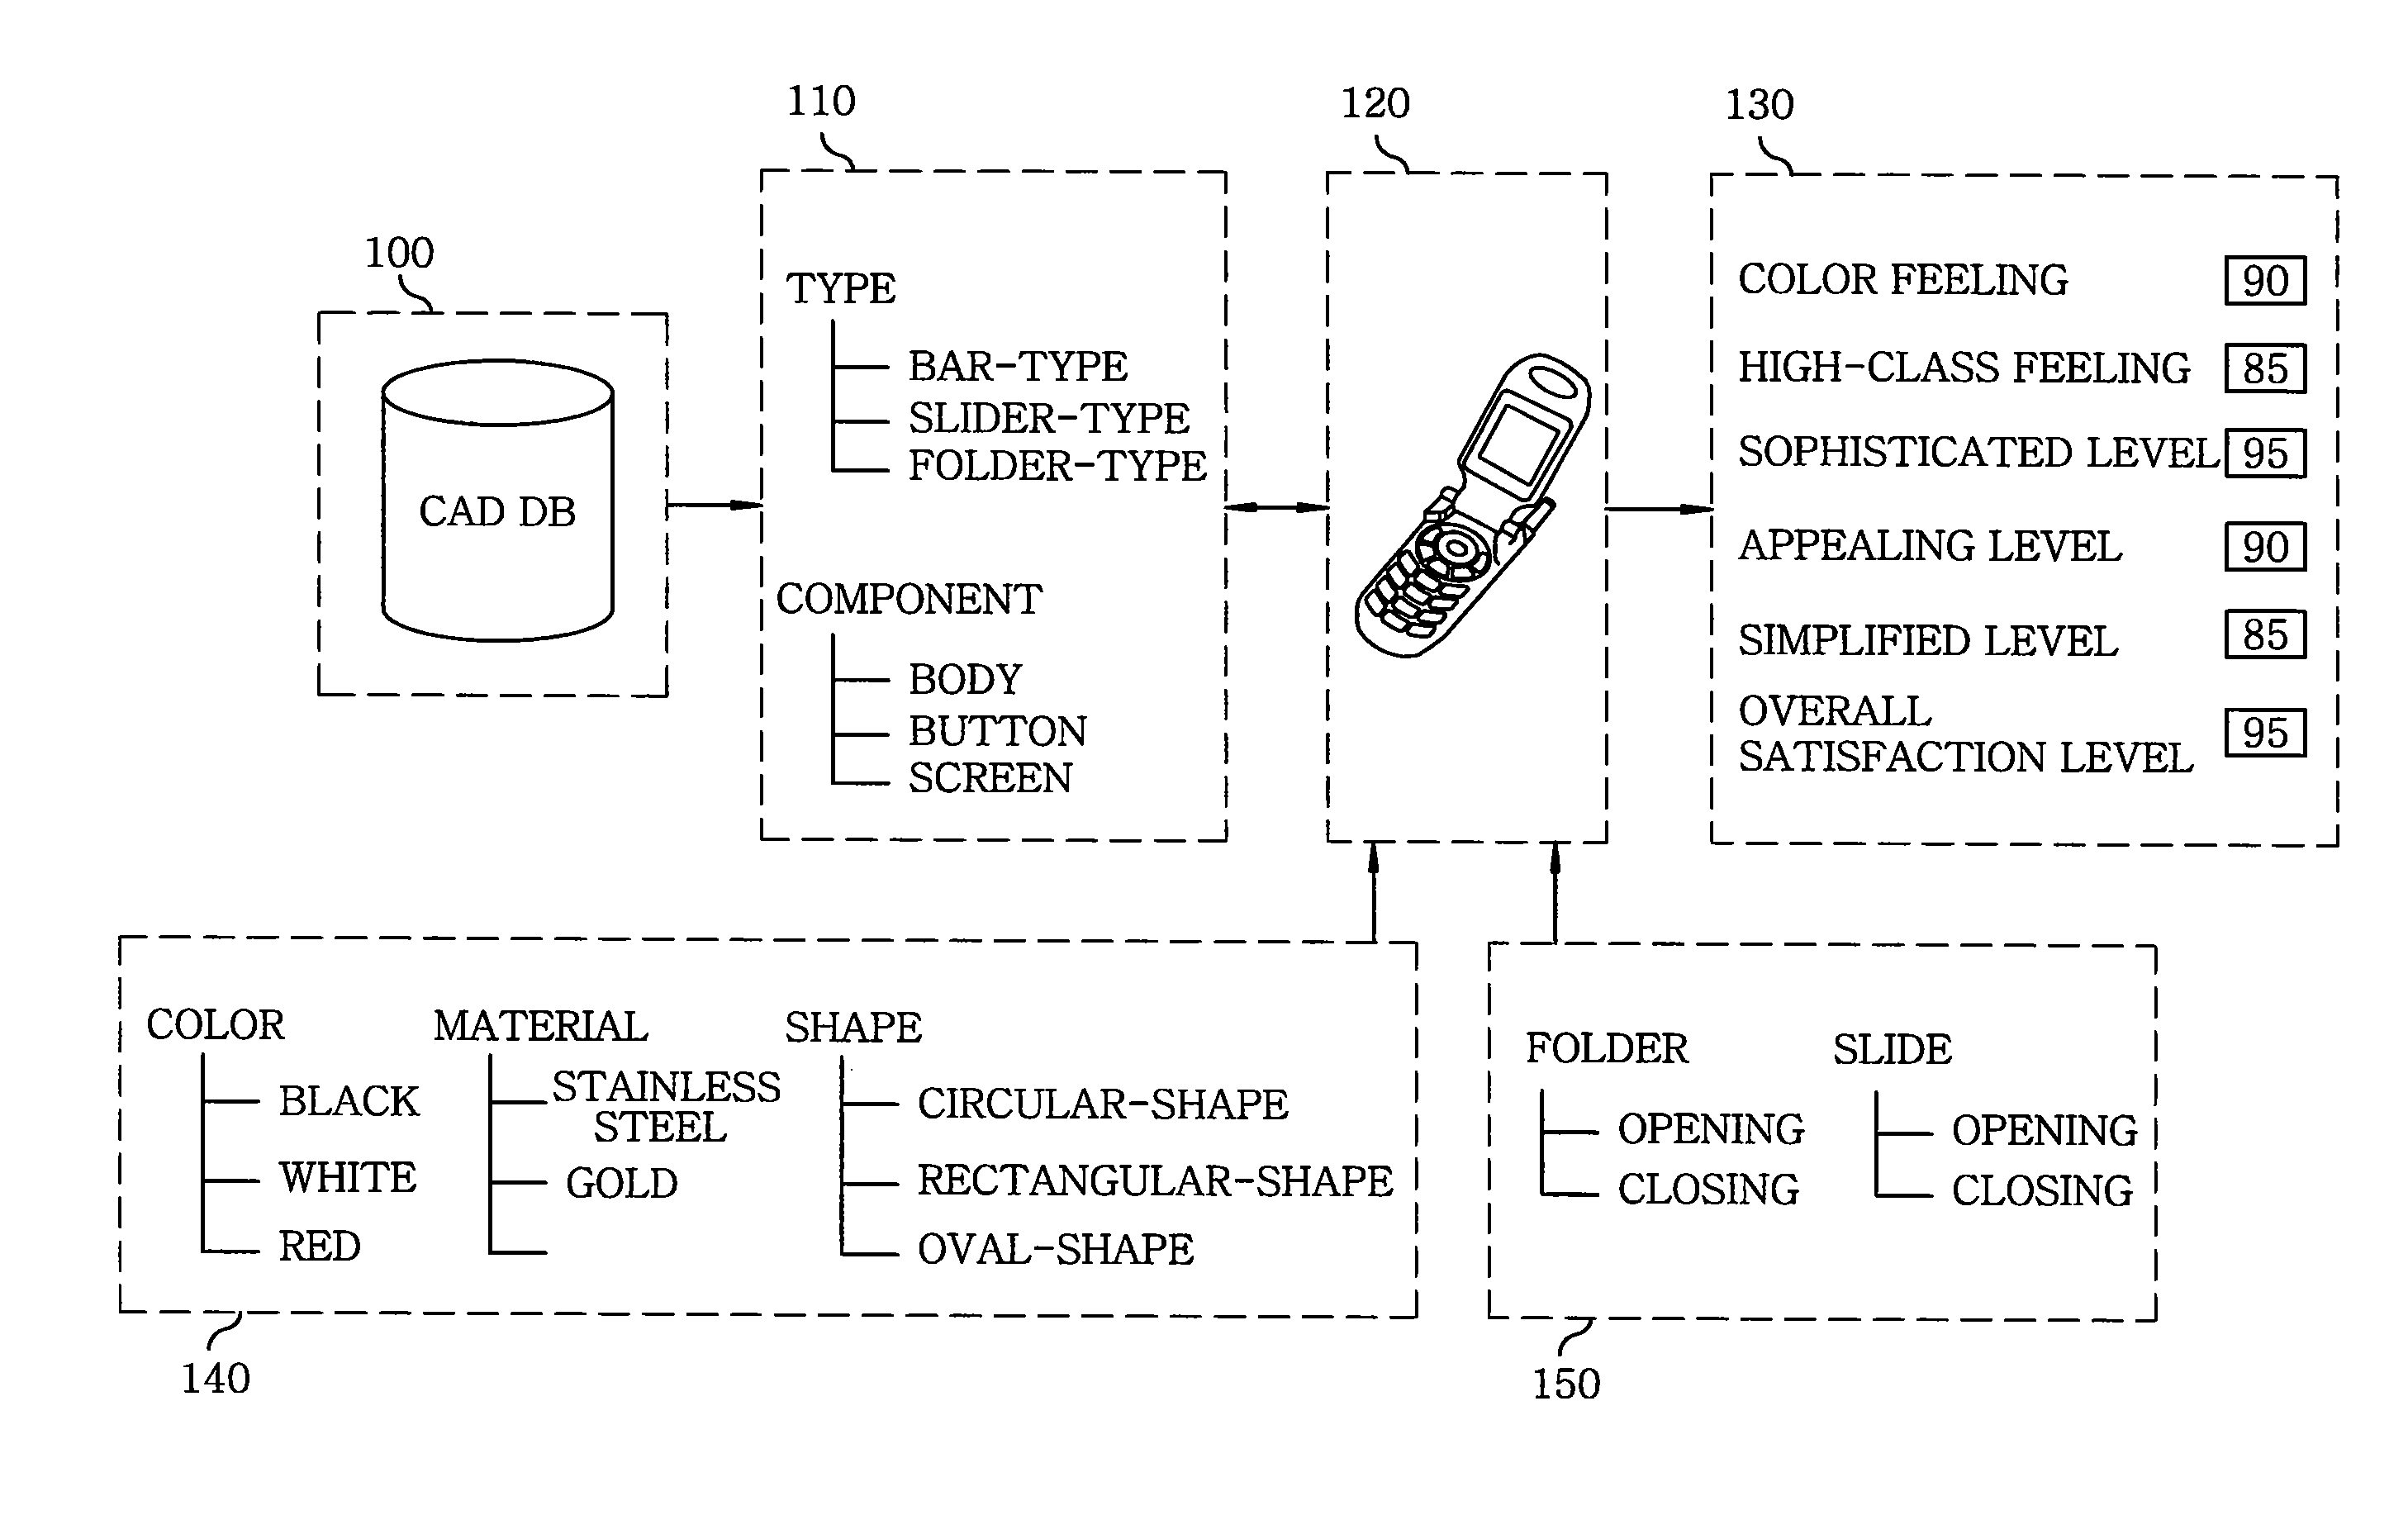 System and method for design evaluation of mobile devices using virtual reality based prototypes